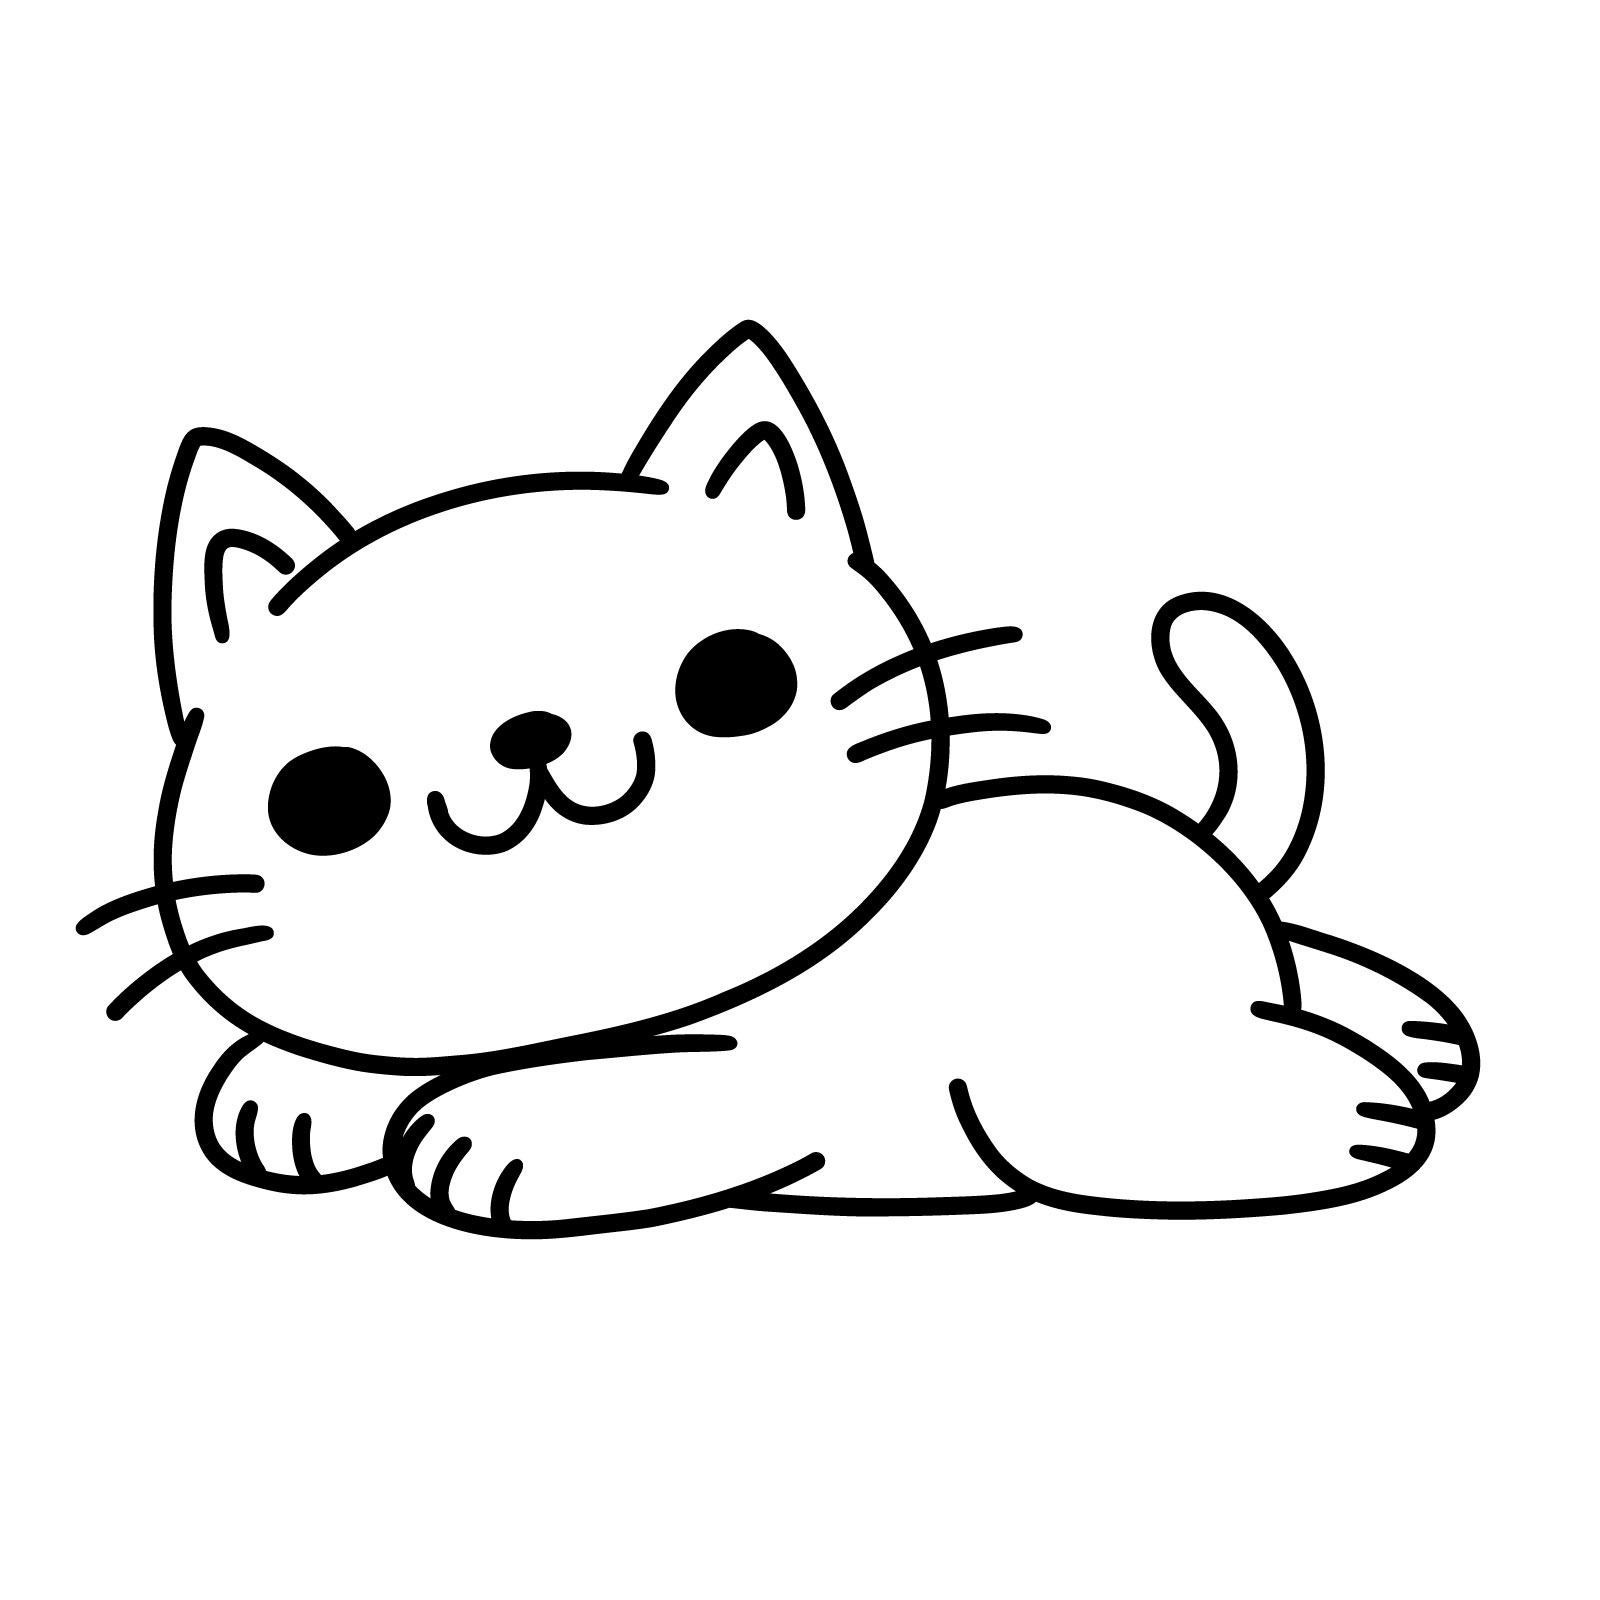 Easy drawing guide on how to draw a cat lying on its belly - the result